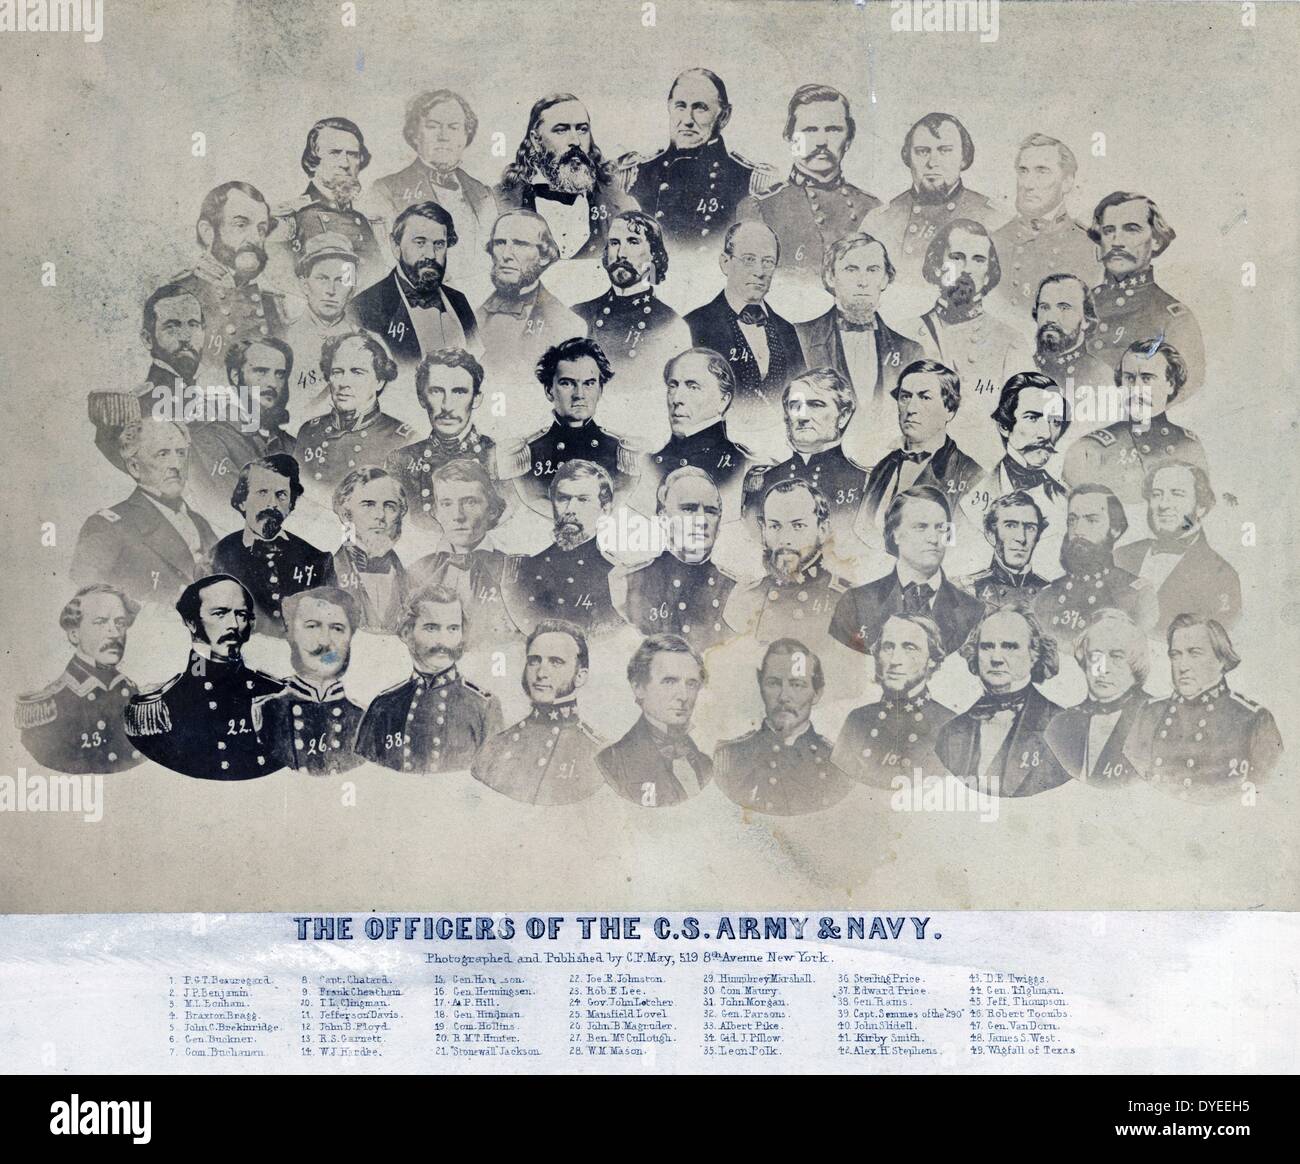 The officers of the C.S. Army & Navy 1861 A.D. Stock Photo